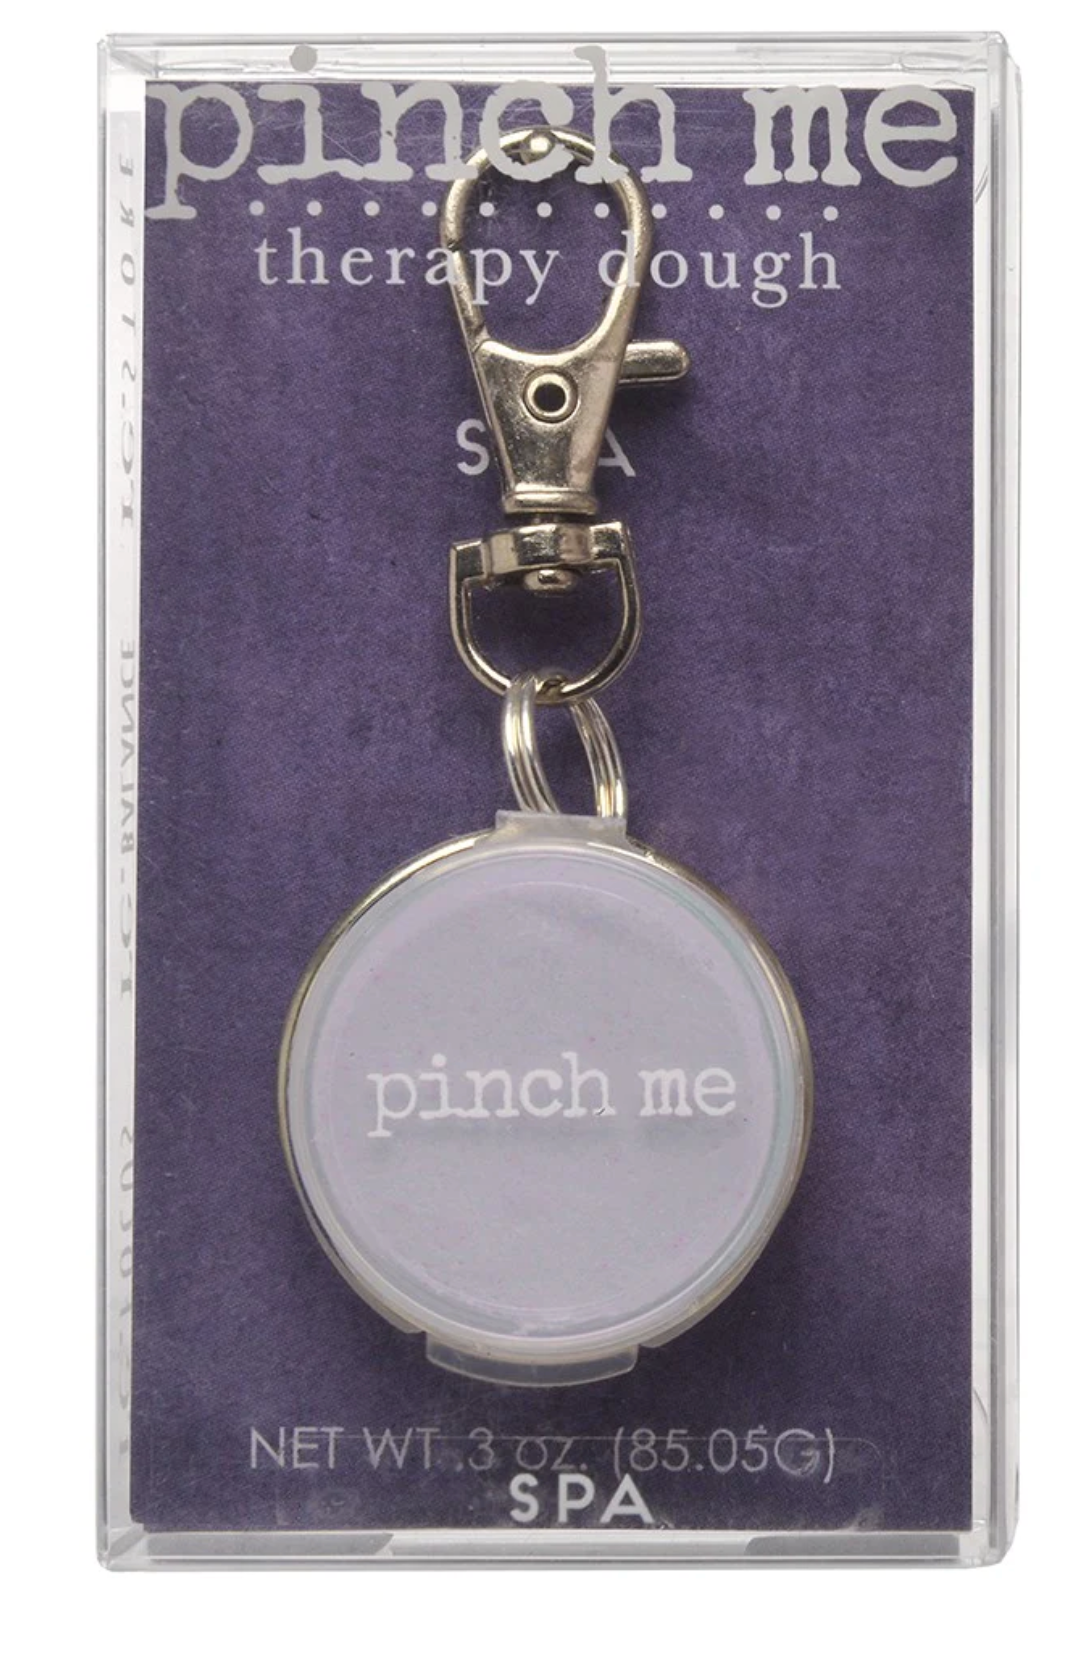 Clip-On Locket - Therapy Dough